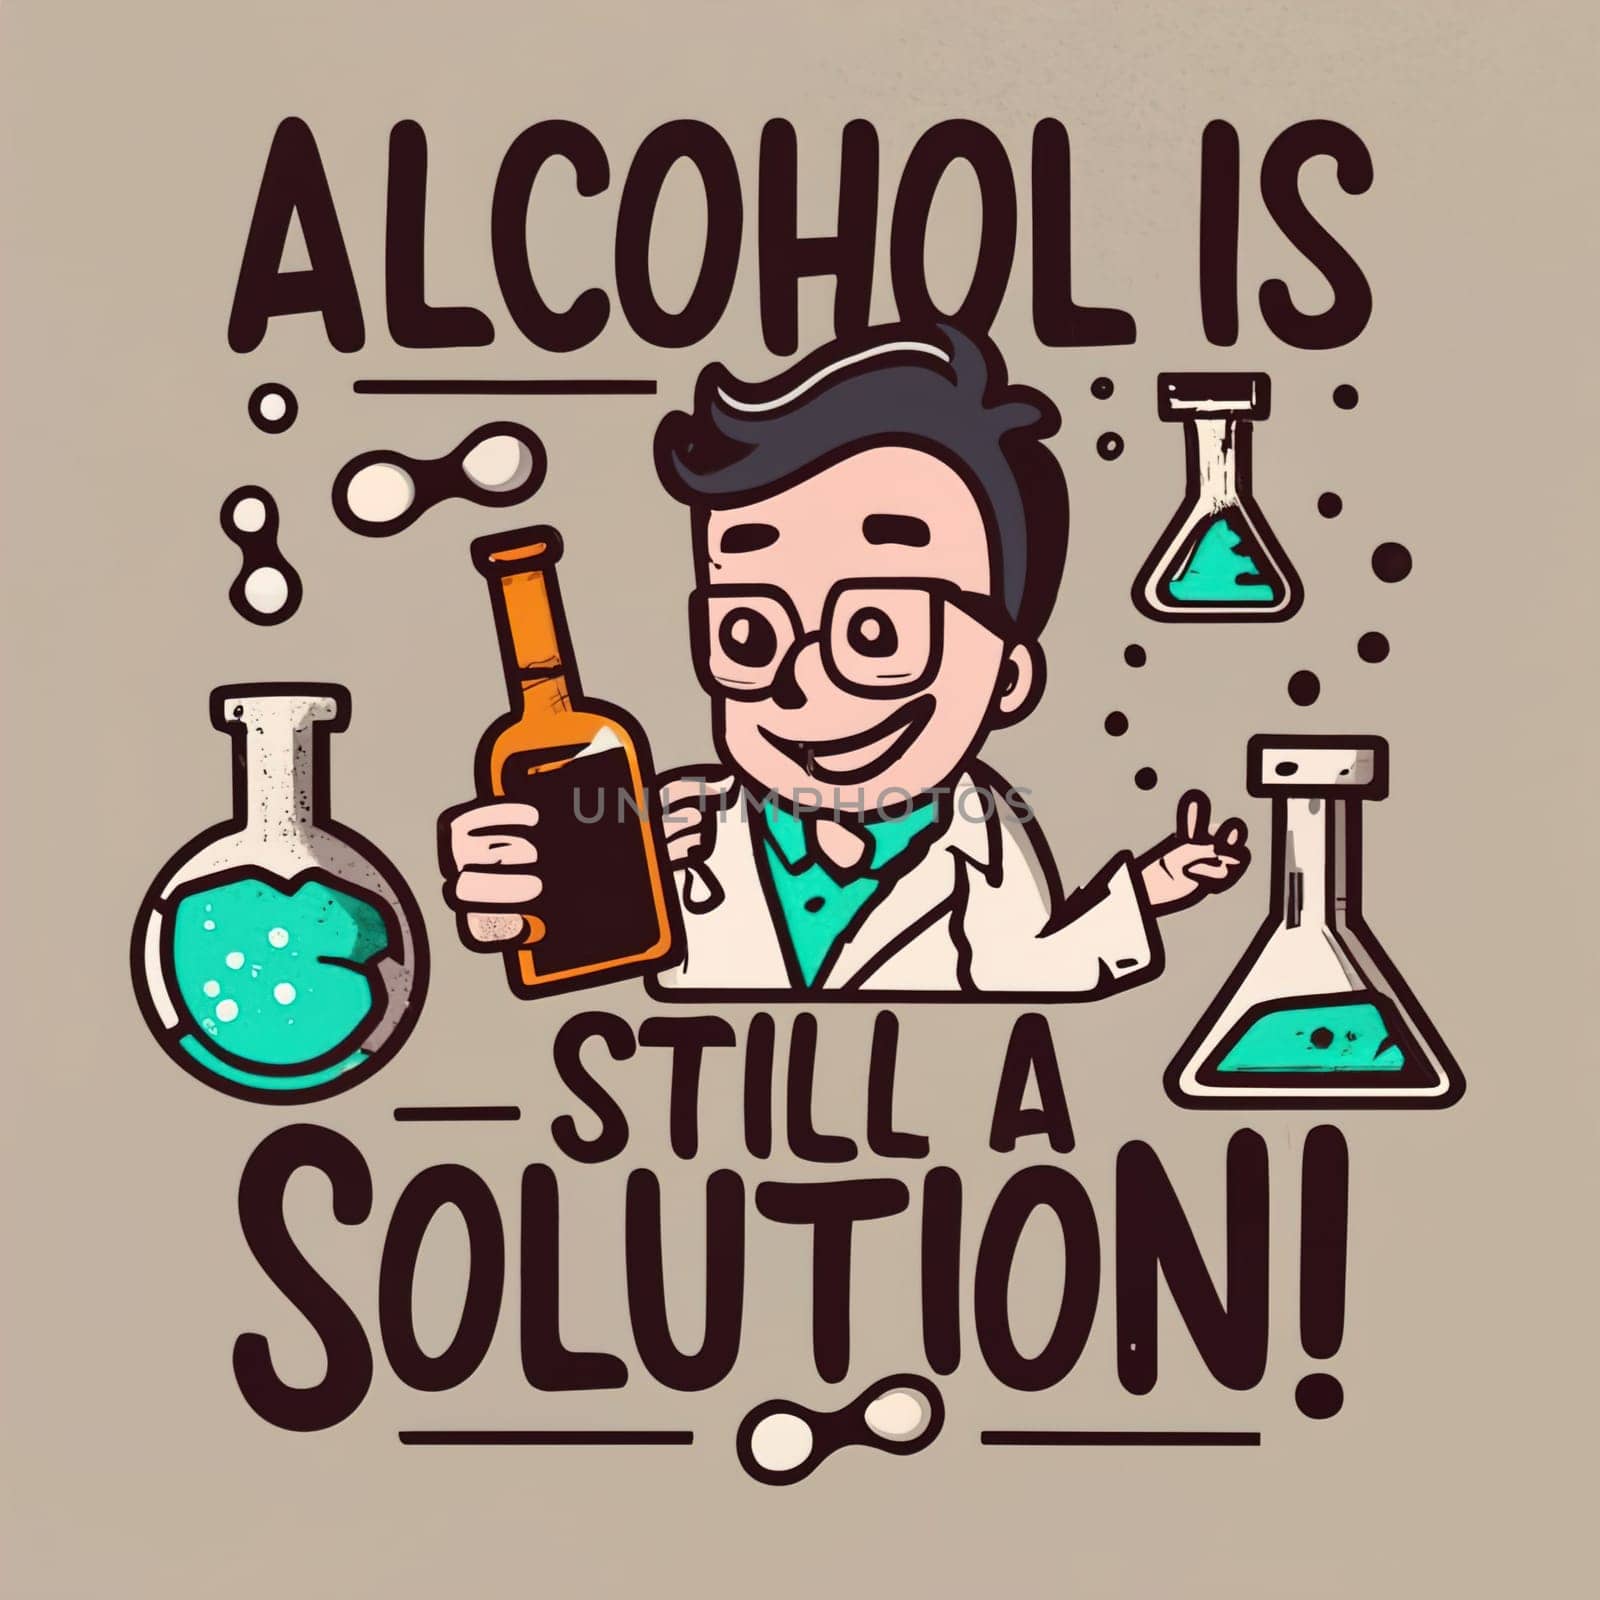 Chemistry Nerd Illustration with Alcohol Is Still a Solution Typography - Educational Poster Art download image